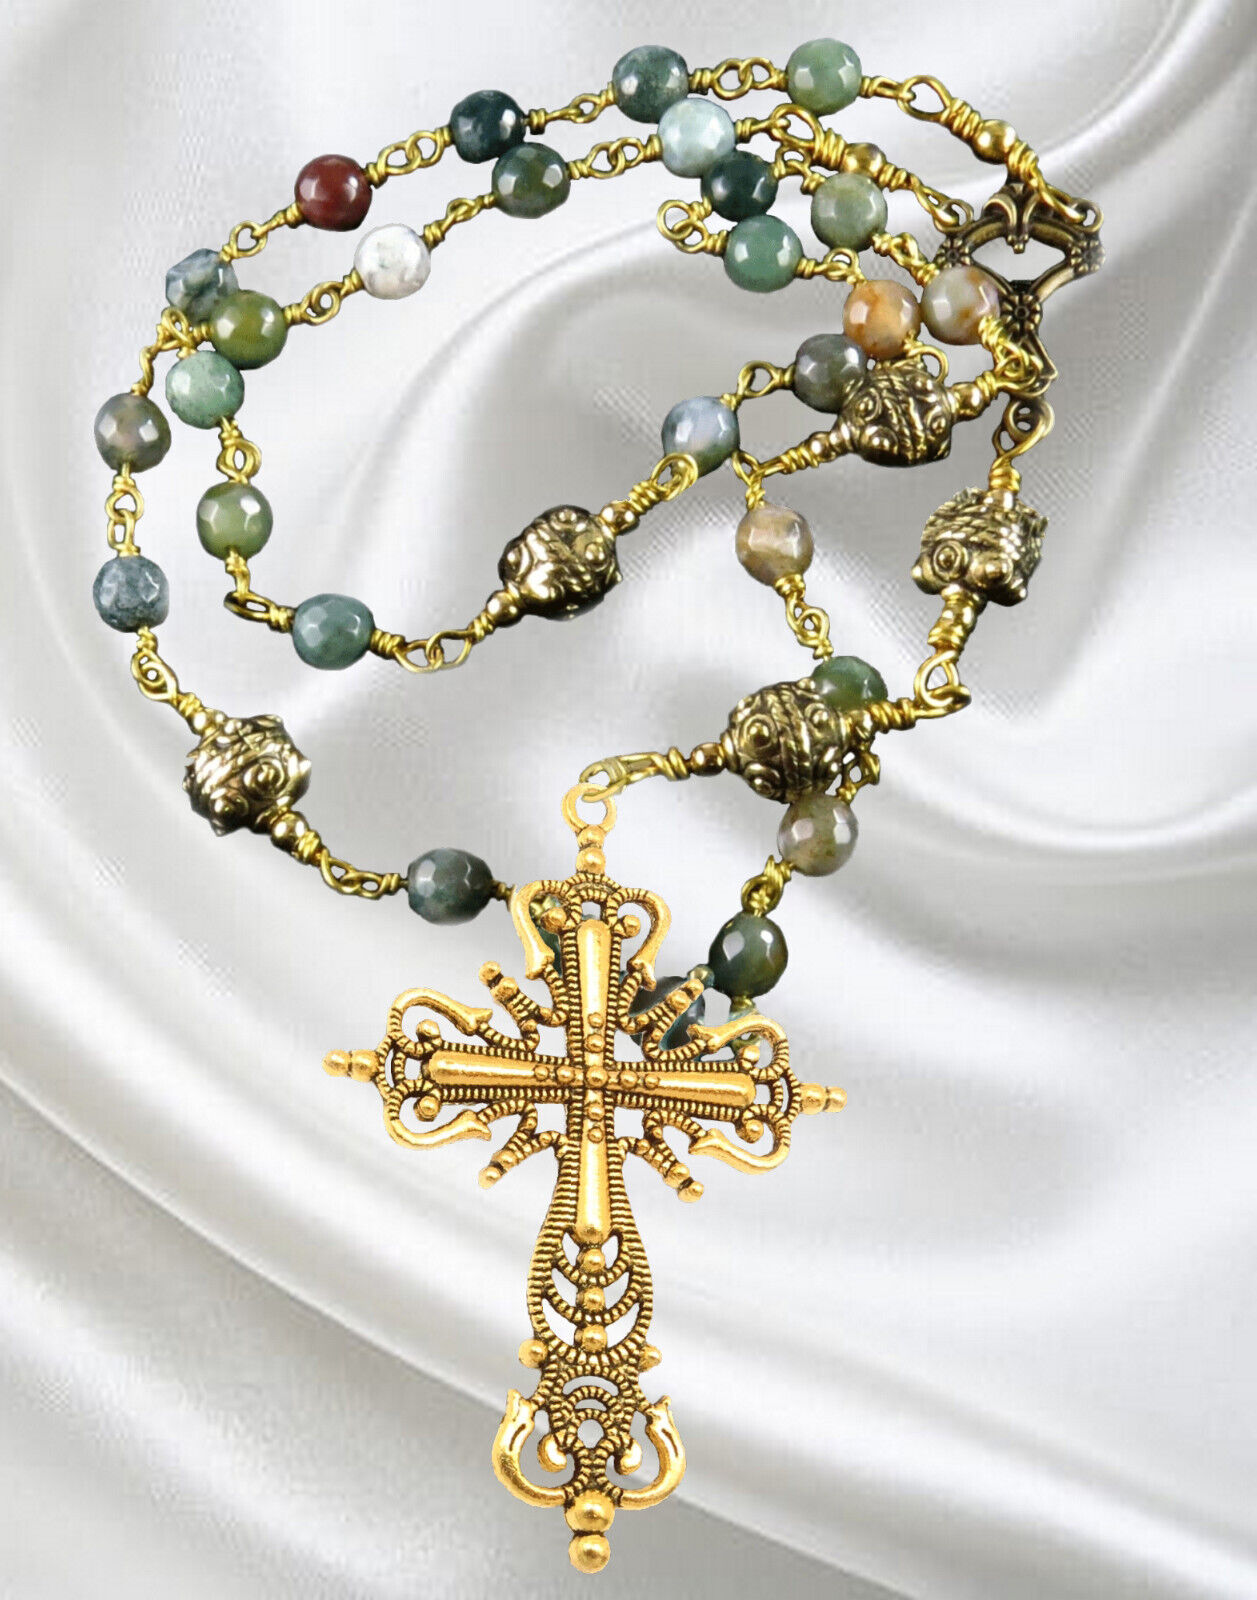 Anglican Unbreakable Rosary, Green Agate Beads, Gold Tone Beads, Filigree Cross